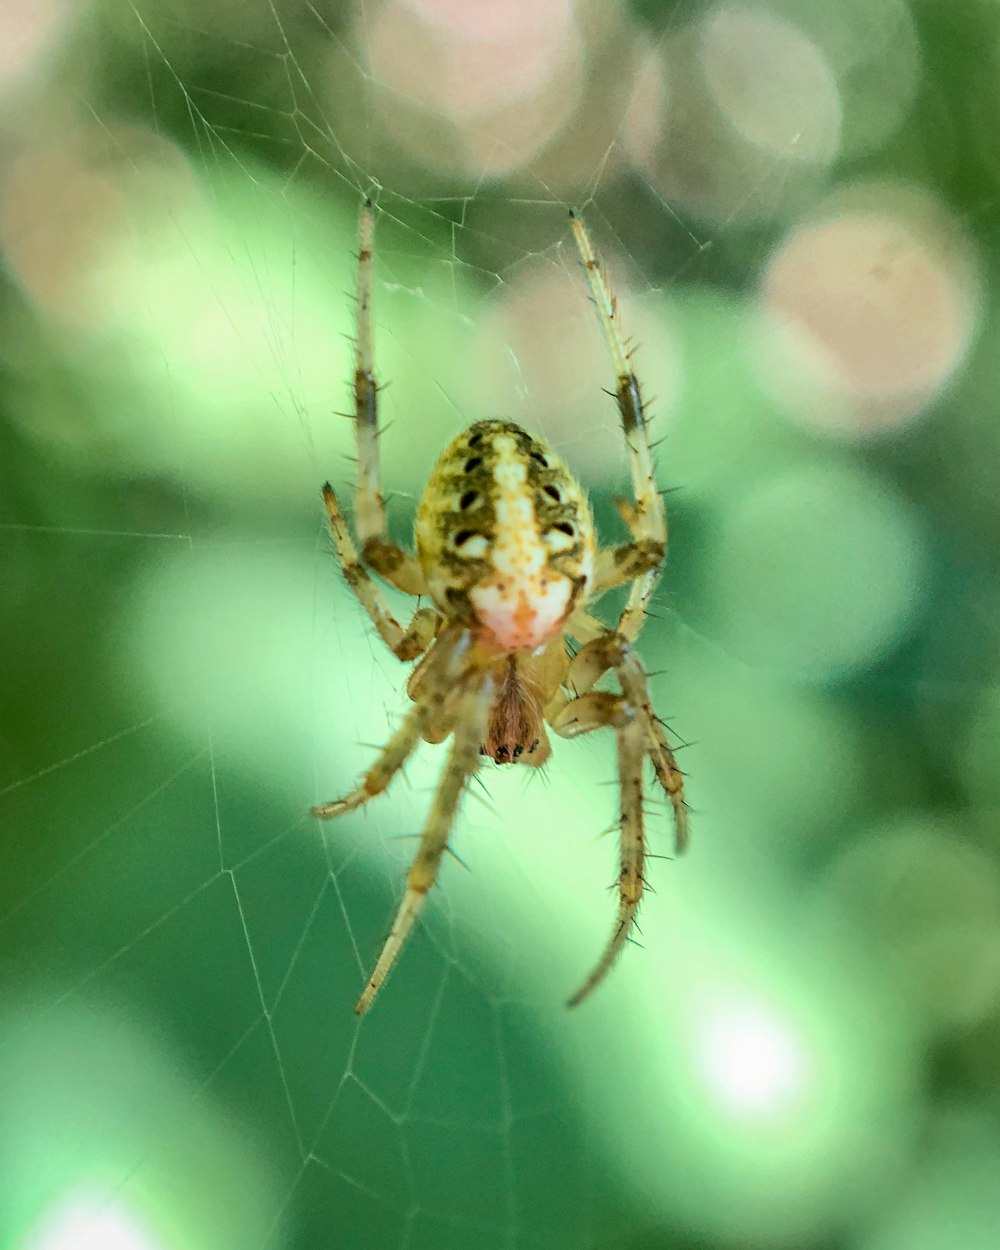 brown and black spider on web in close up photography during daytime